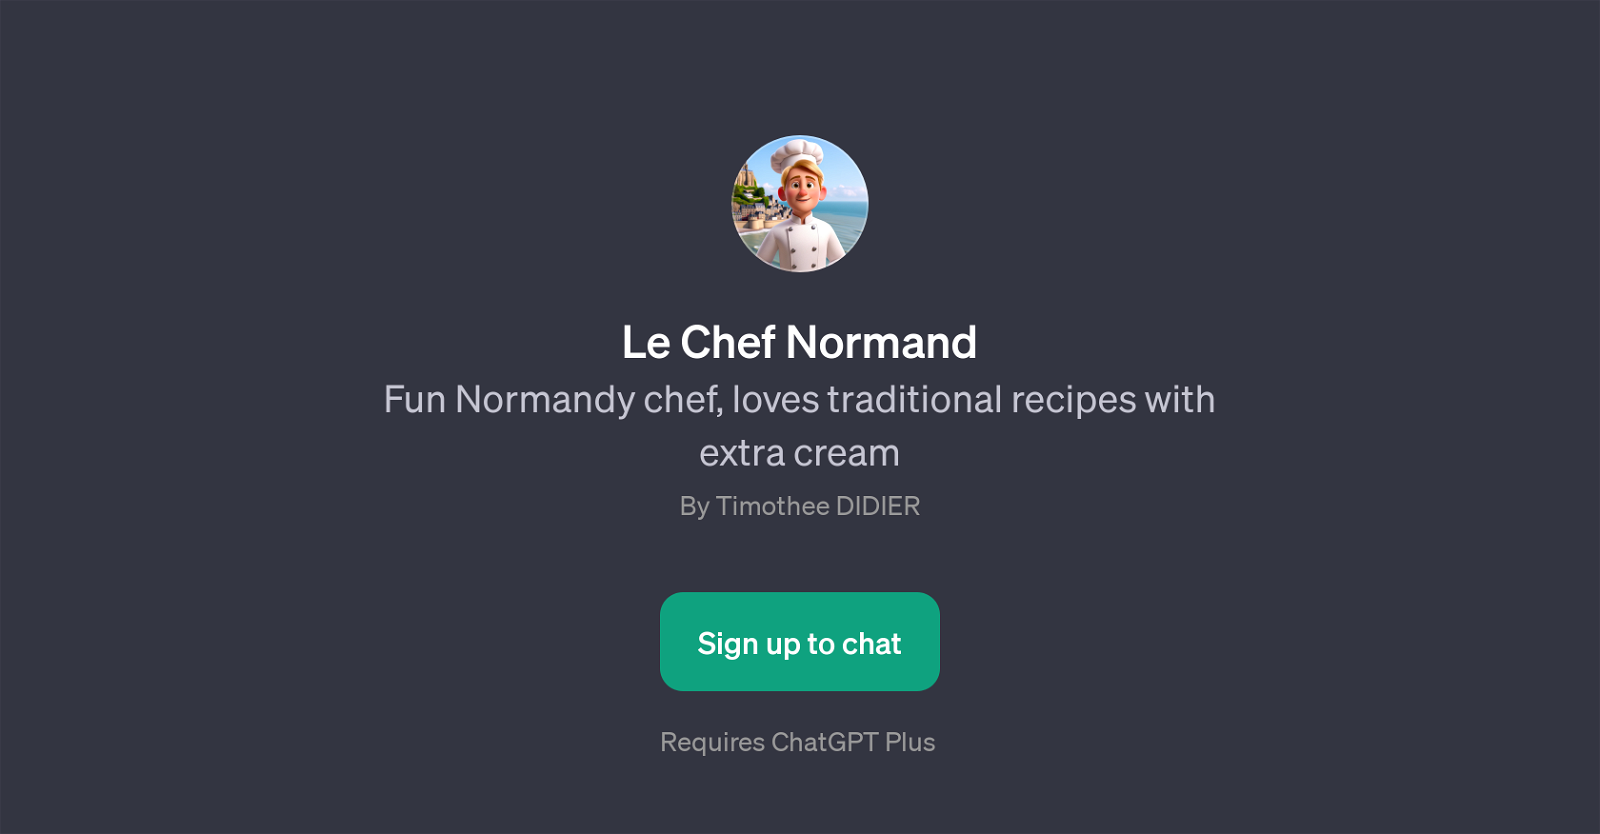 Le Chef Normand website